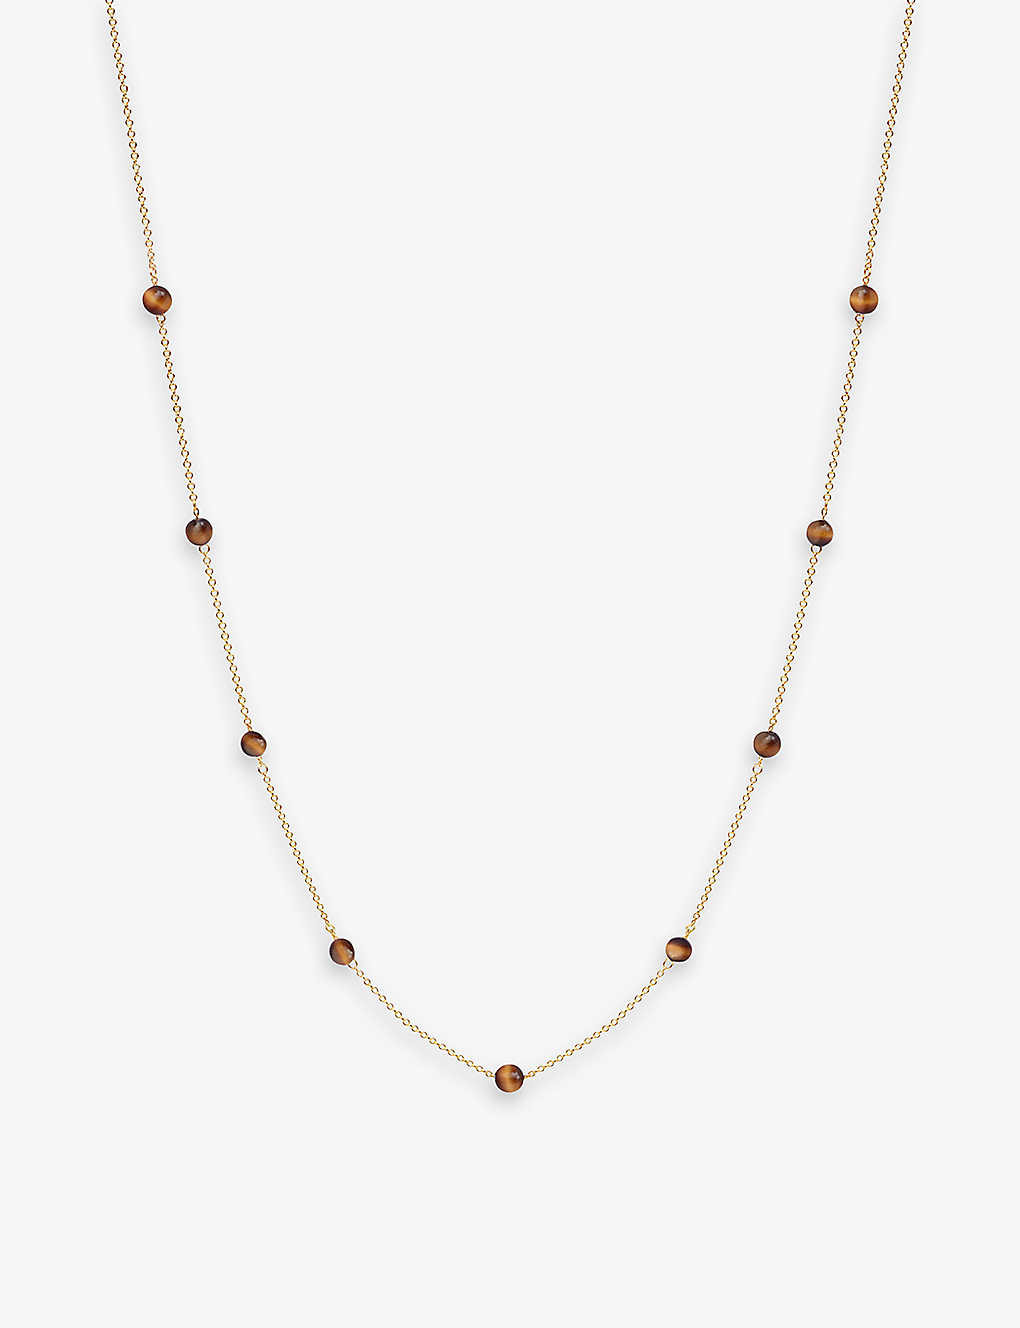 The Alkemistry 18kt Recycled Yellow Gold Brown Sugar Tiger Eye Necklace